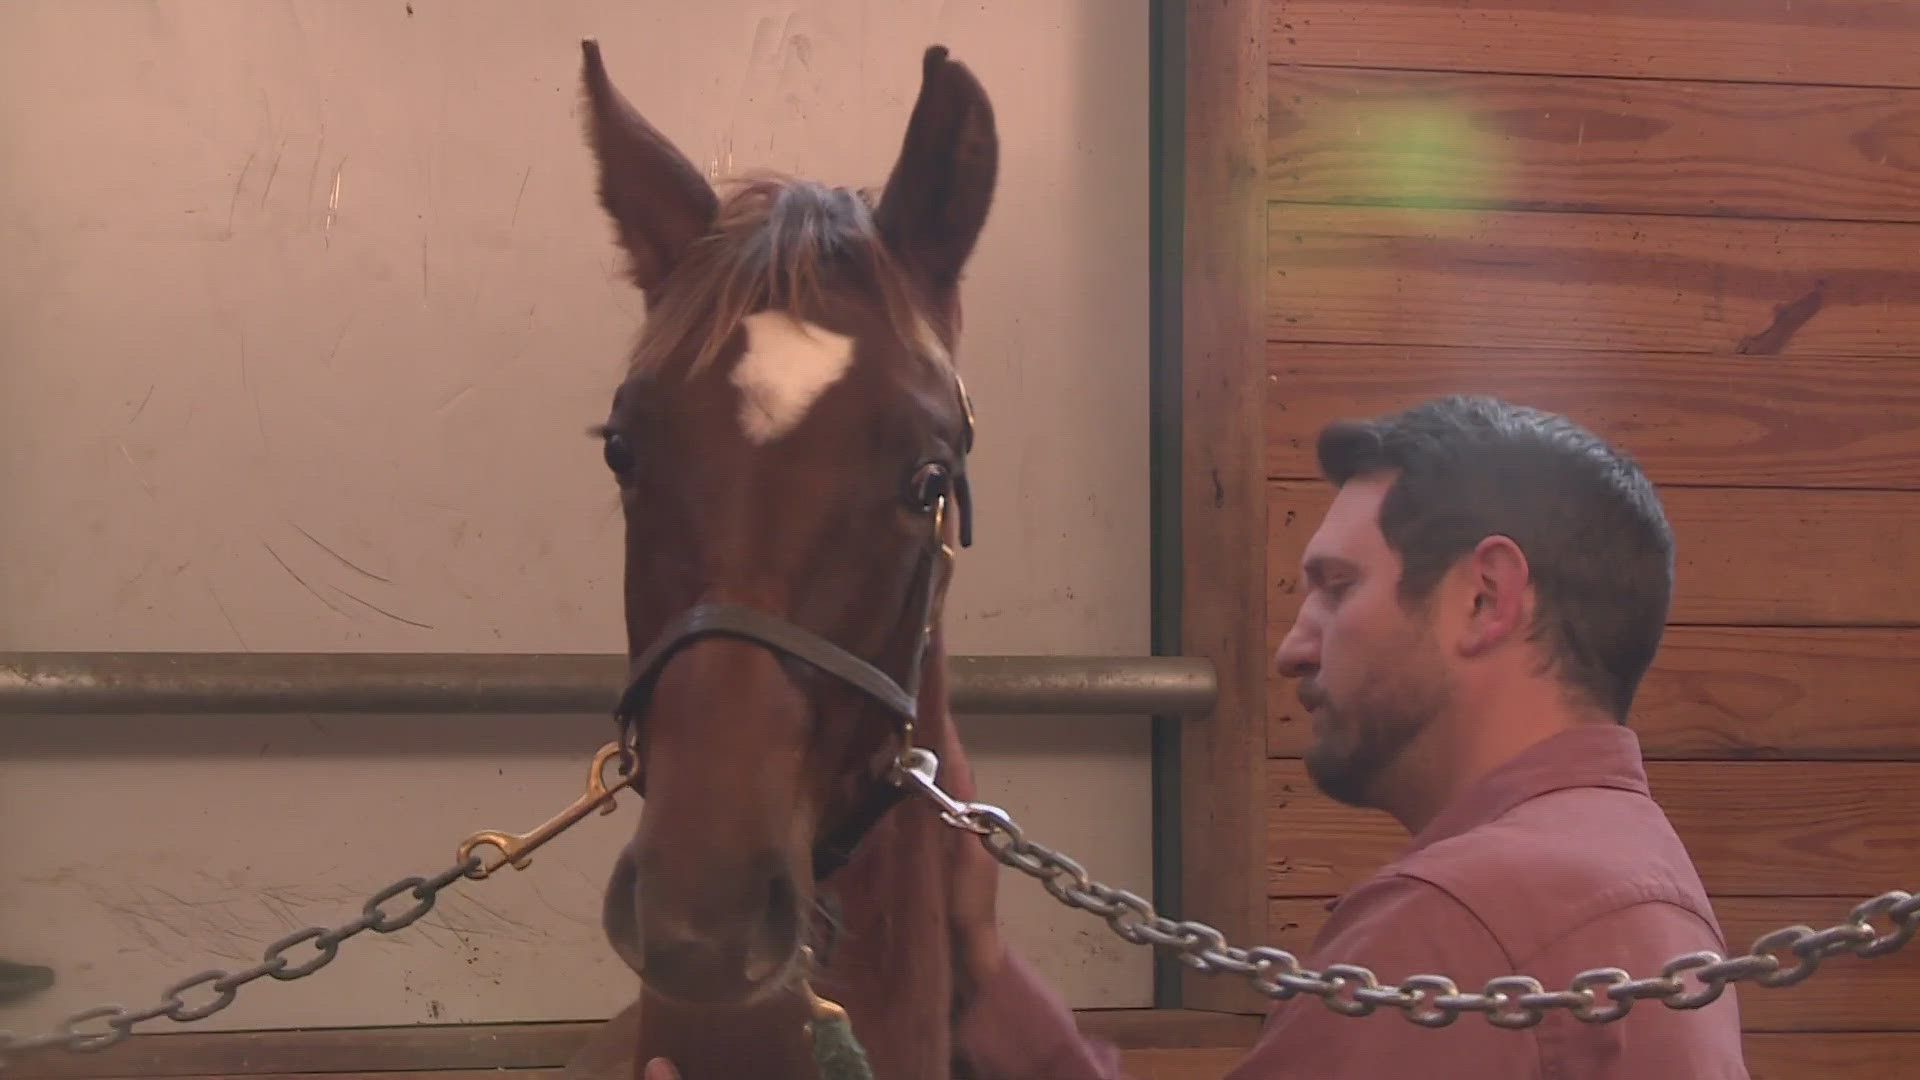 Veterans, addicts and horses heal together at 'HorseSensing